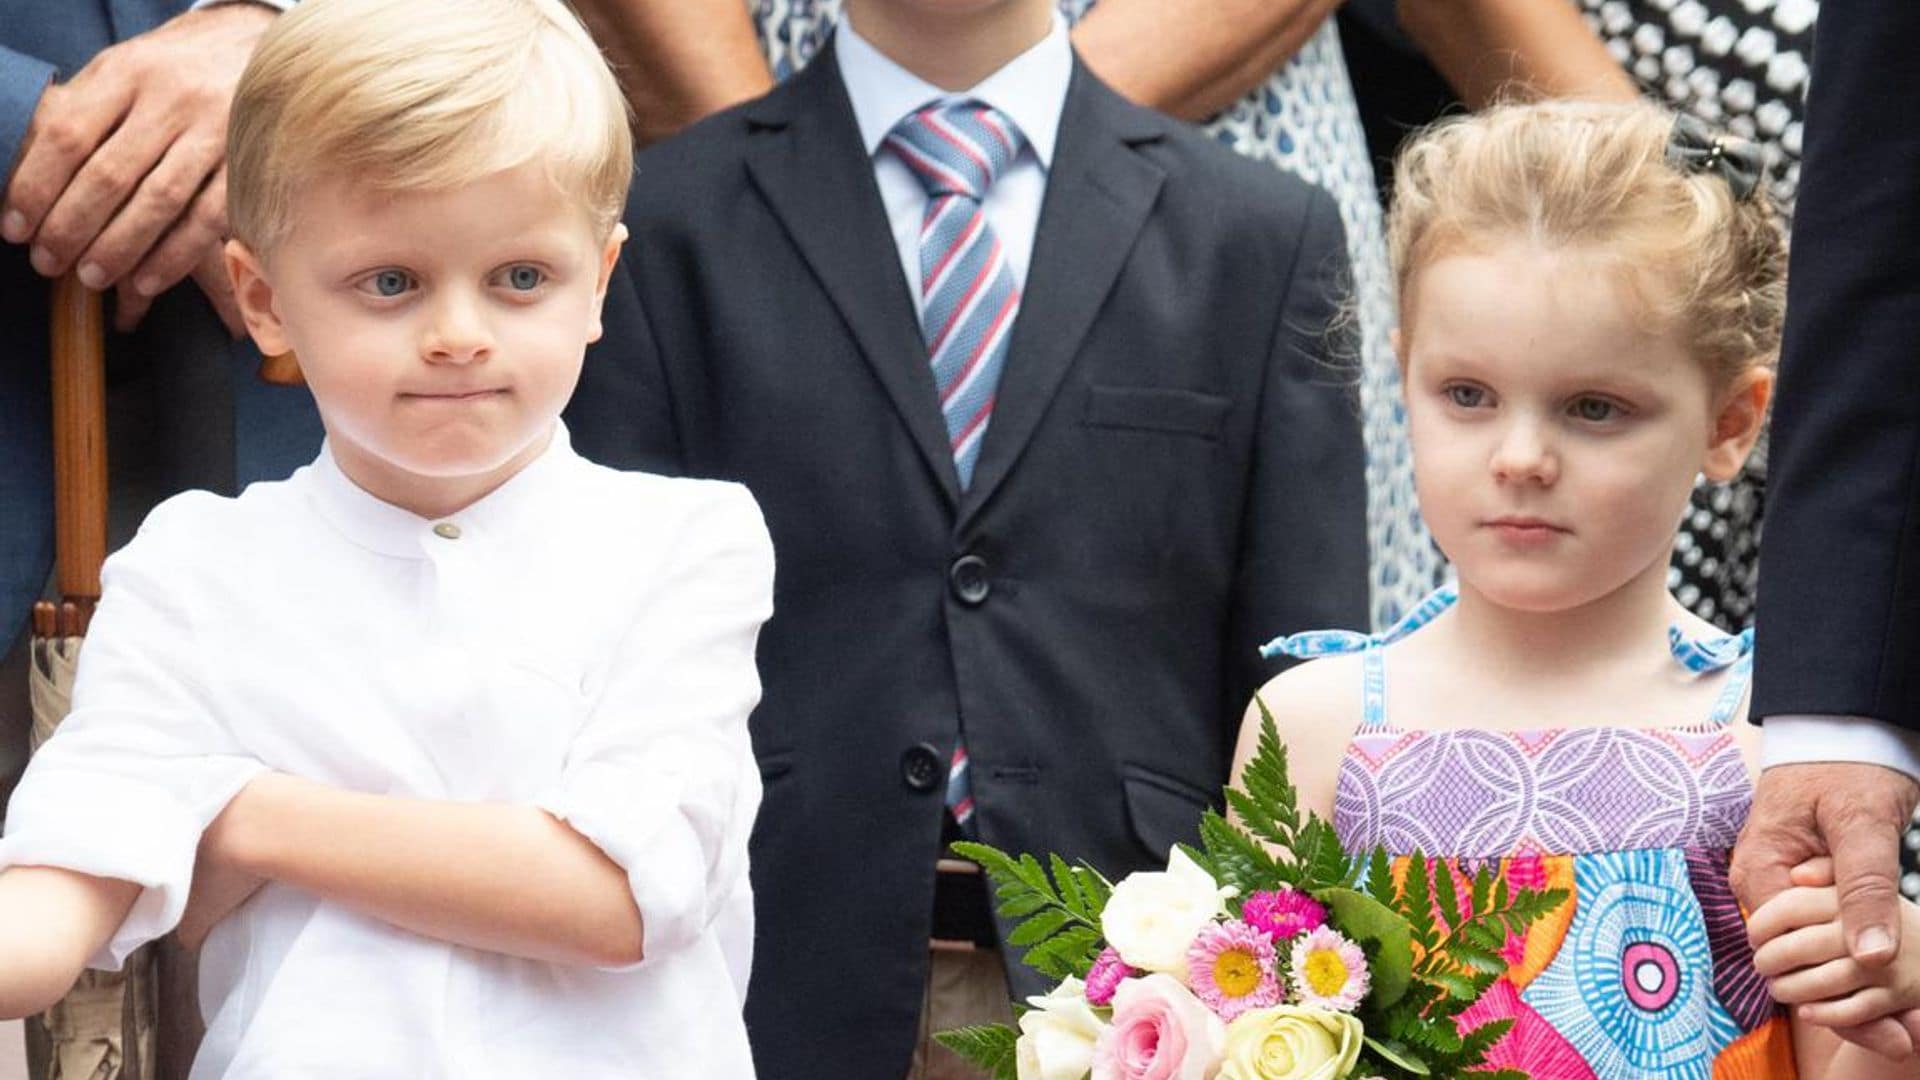 Prince Jacques and Princess Gabriella’s voices will melt your heart in adorable birthday video